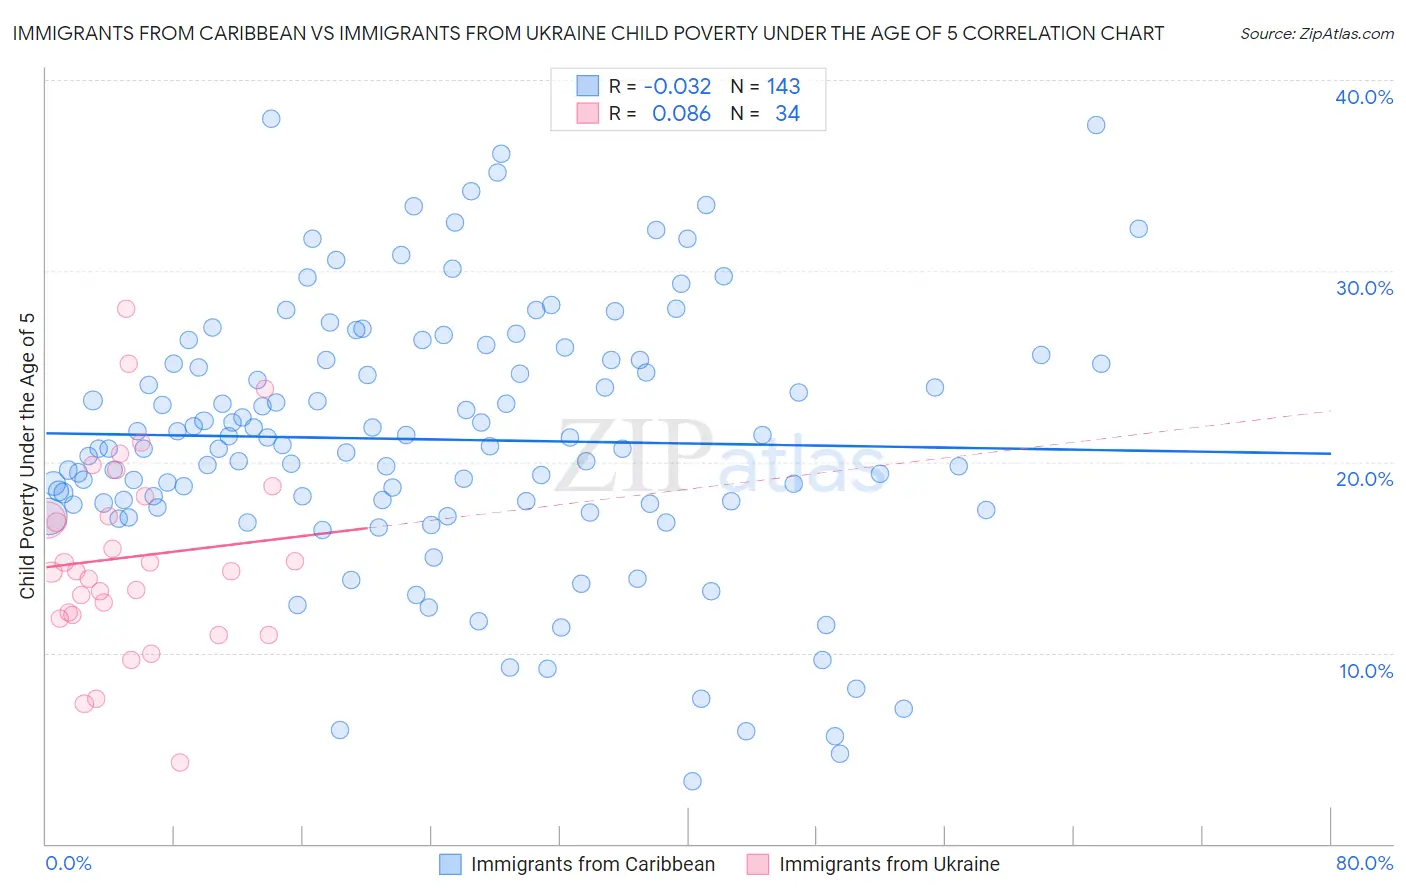 Immigrants from Caribbean vs Immigrants from Ukraine Child Poverty Under the Age of 5